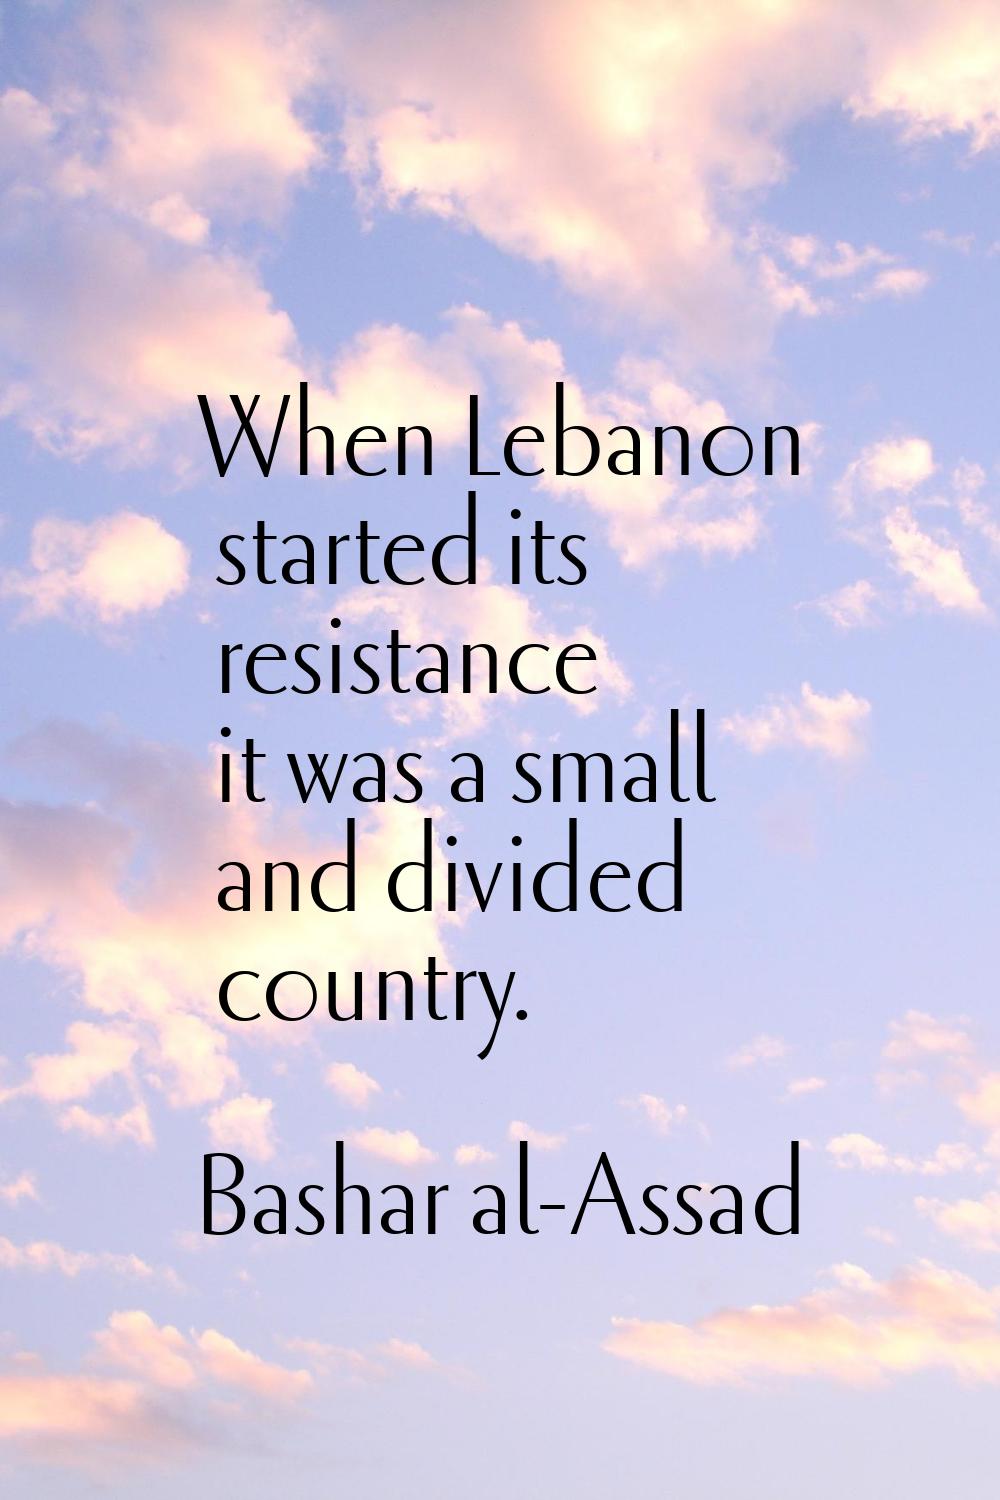 When Lebanon started its resistance it was a small and divided country.